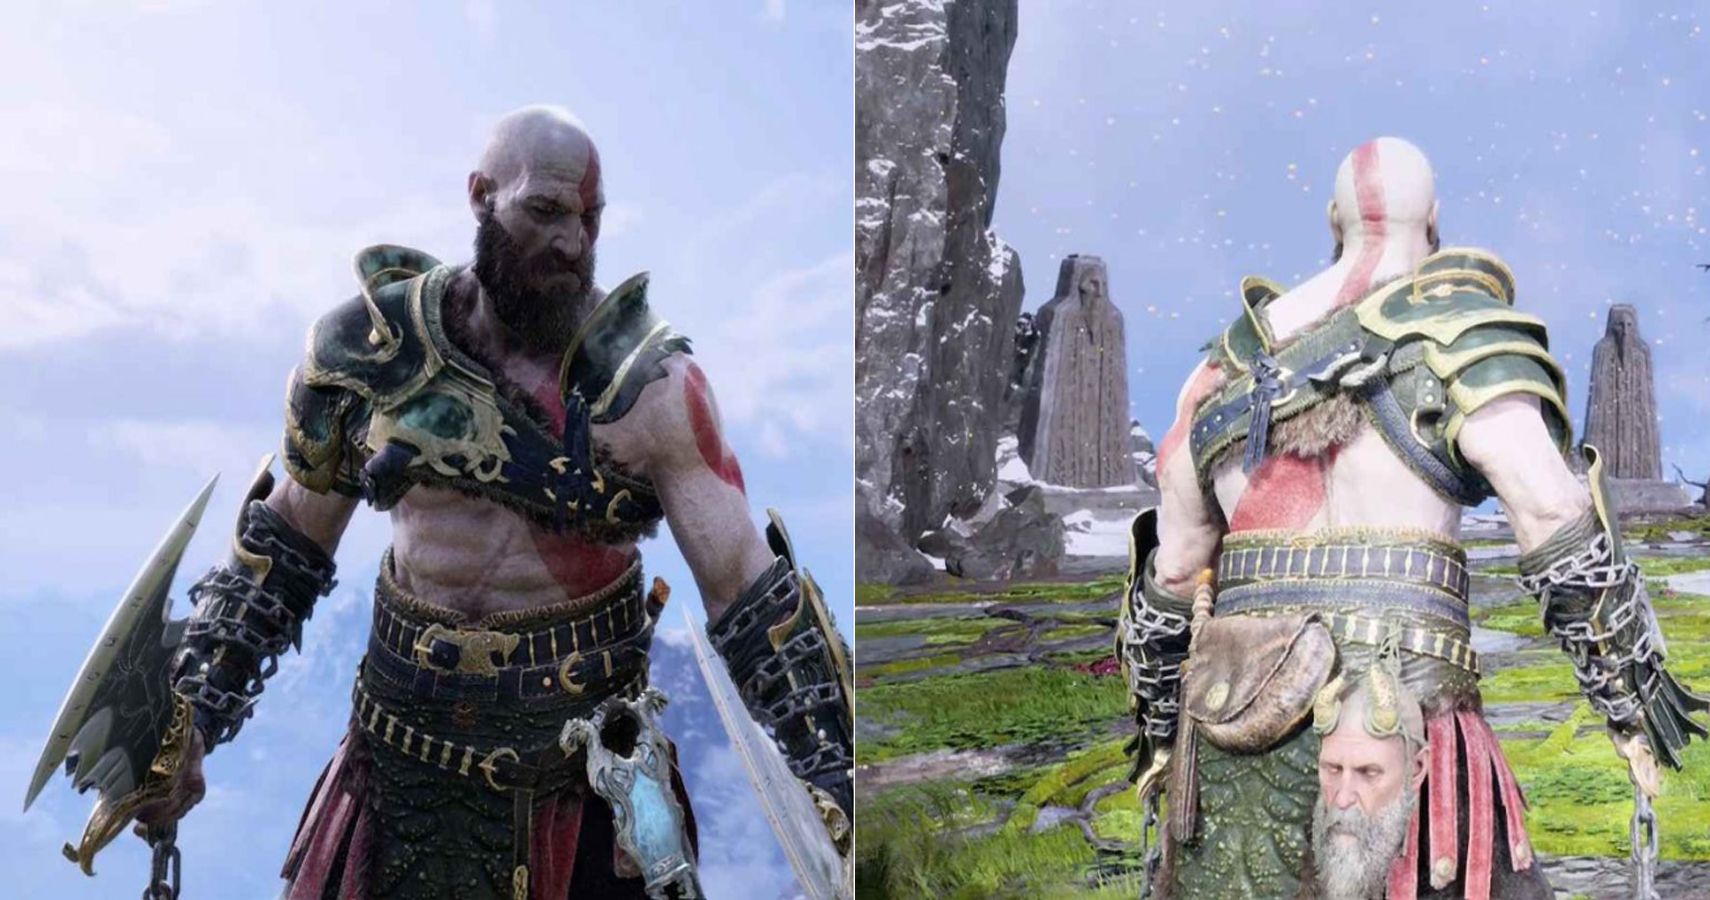 The Ivaldi's Deadly Mist armor from God of War